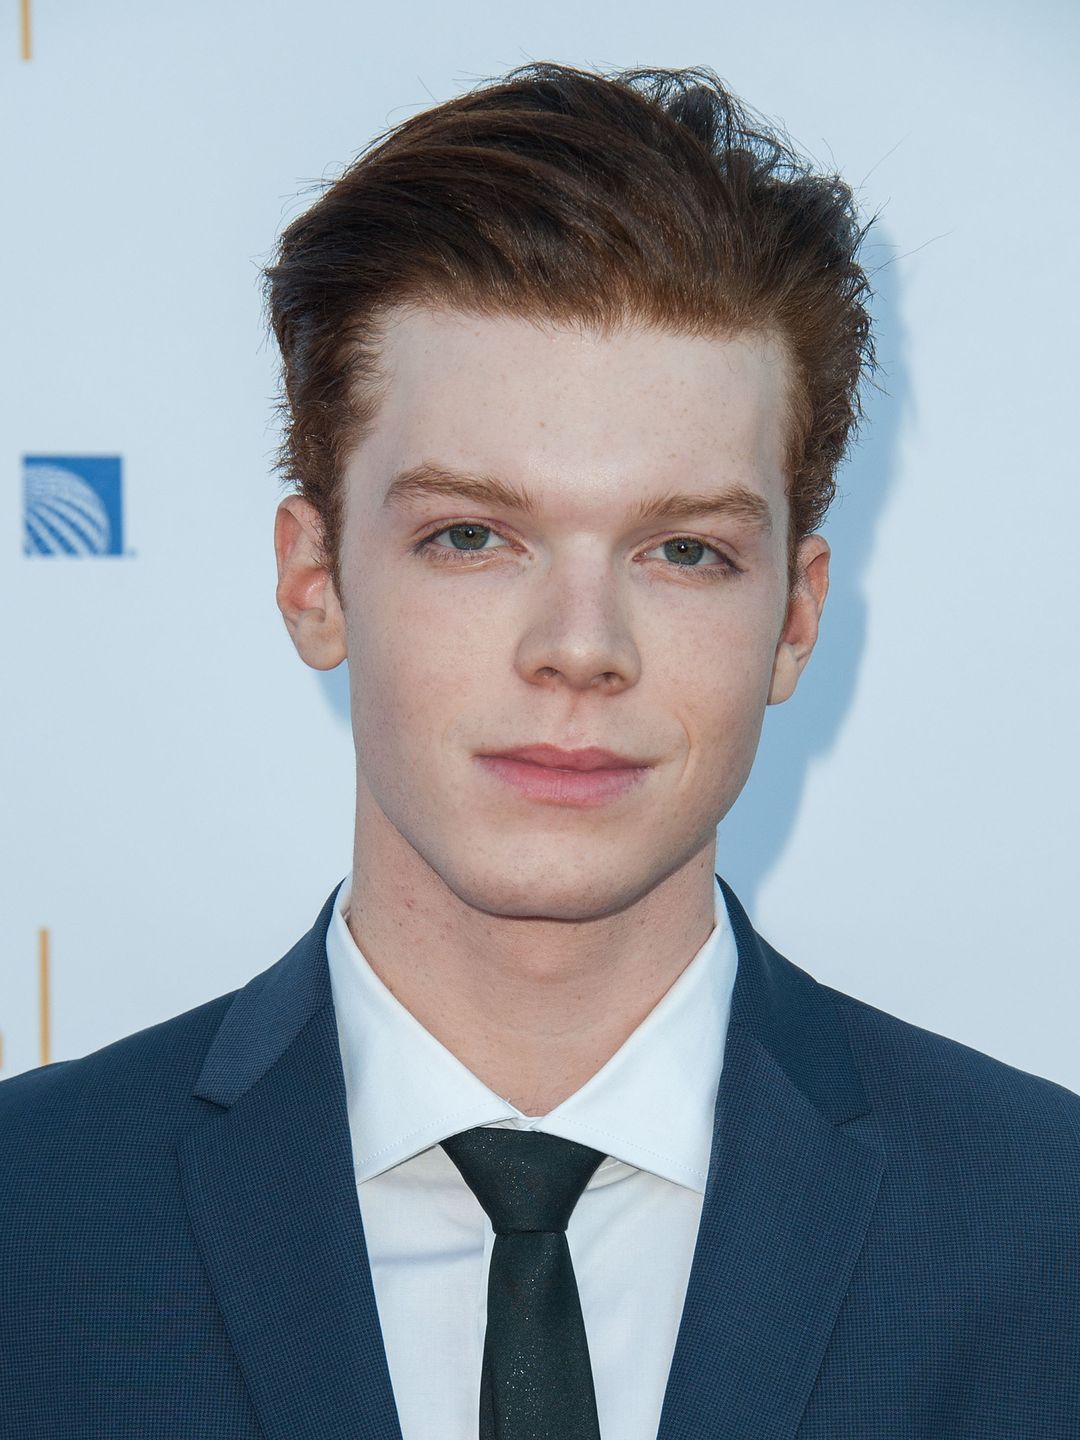 Cameron Monaghan how did he became famous